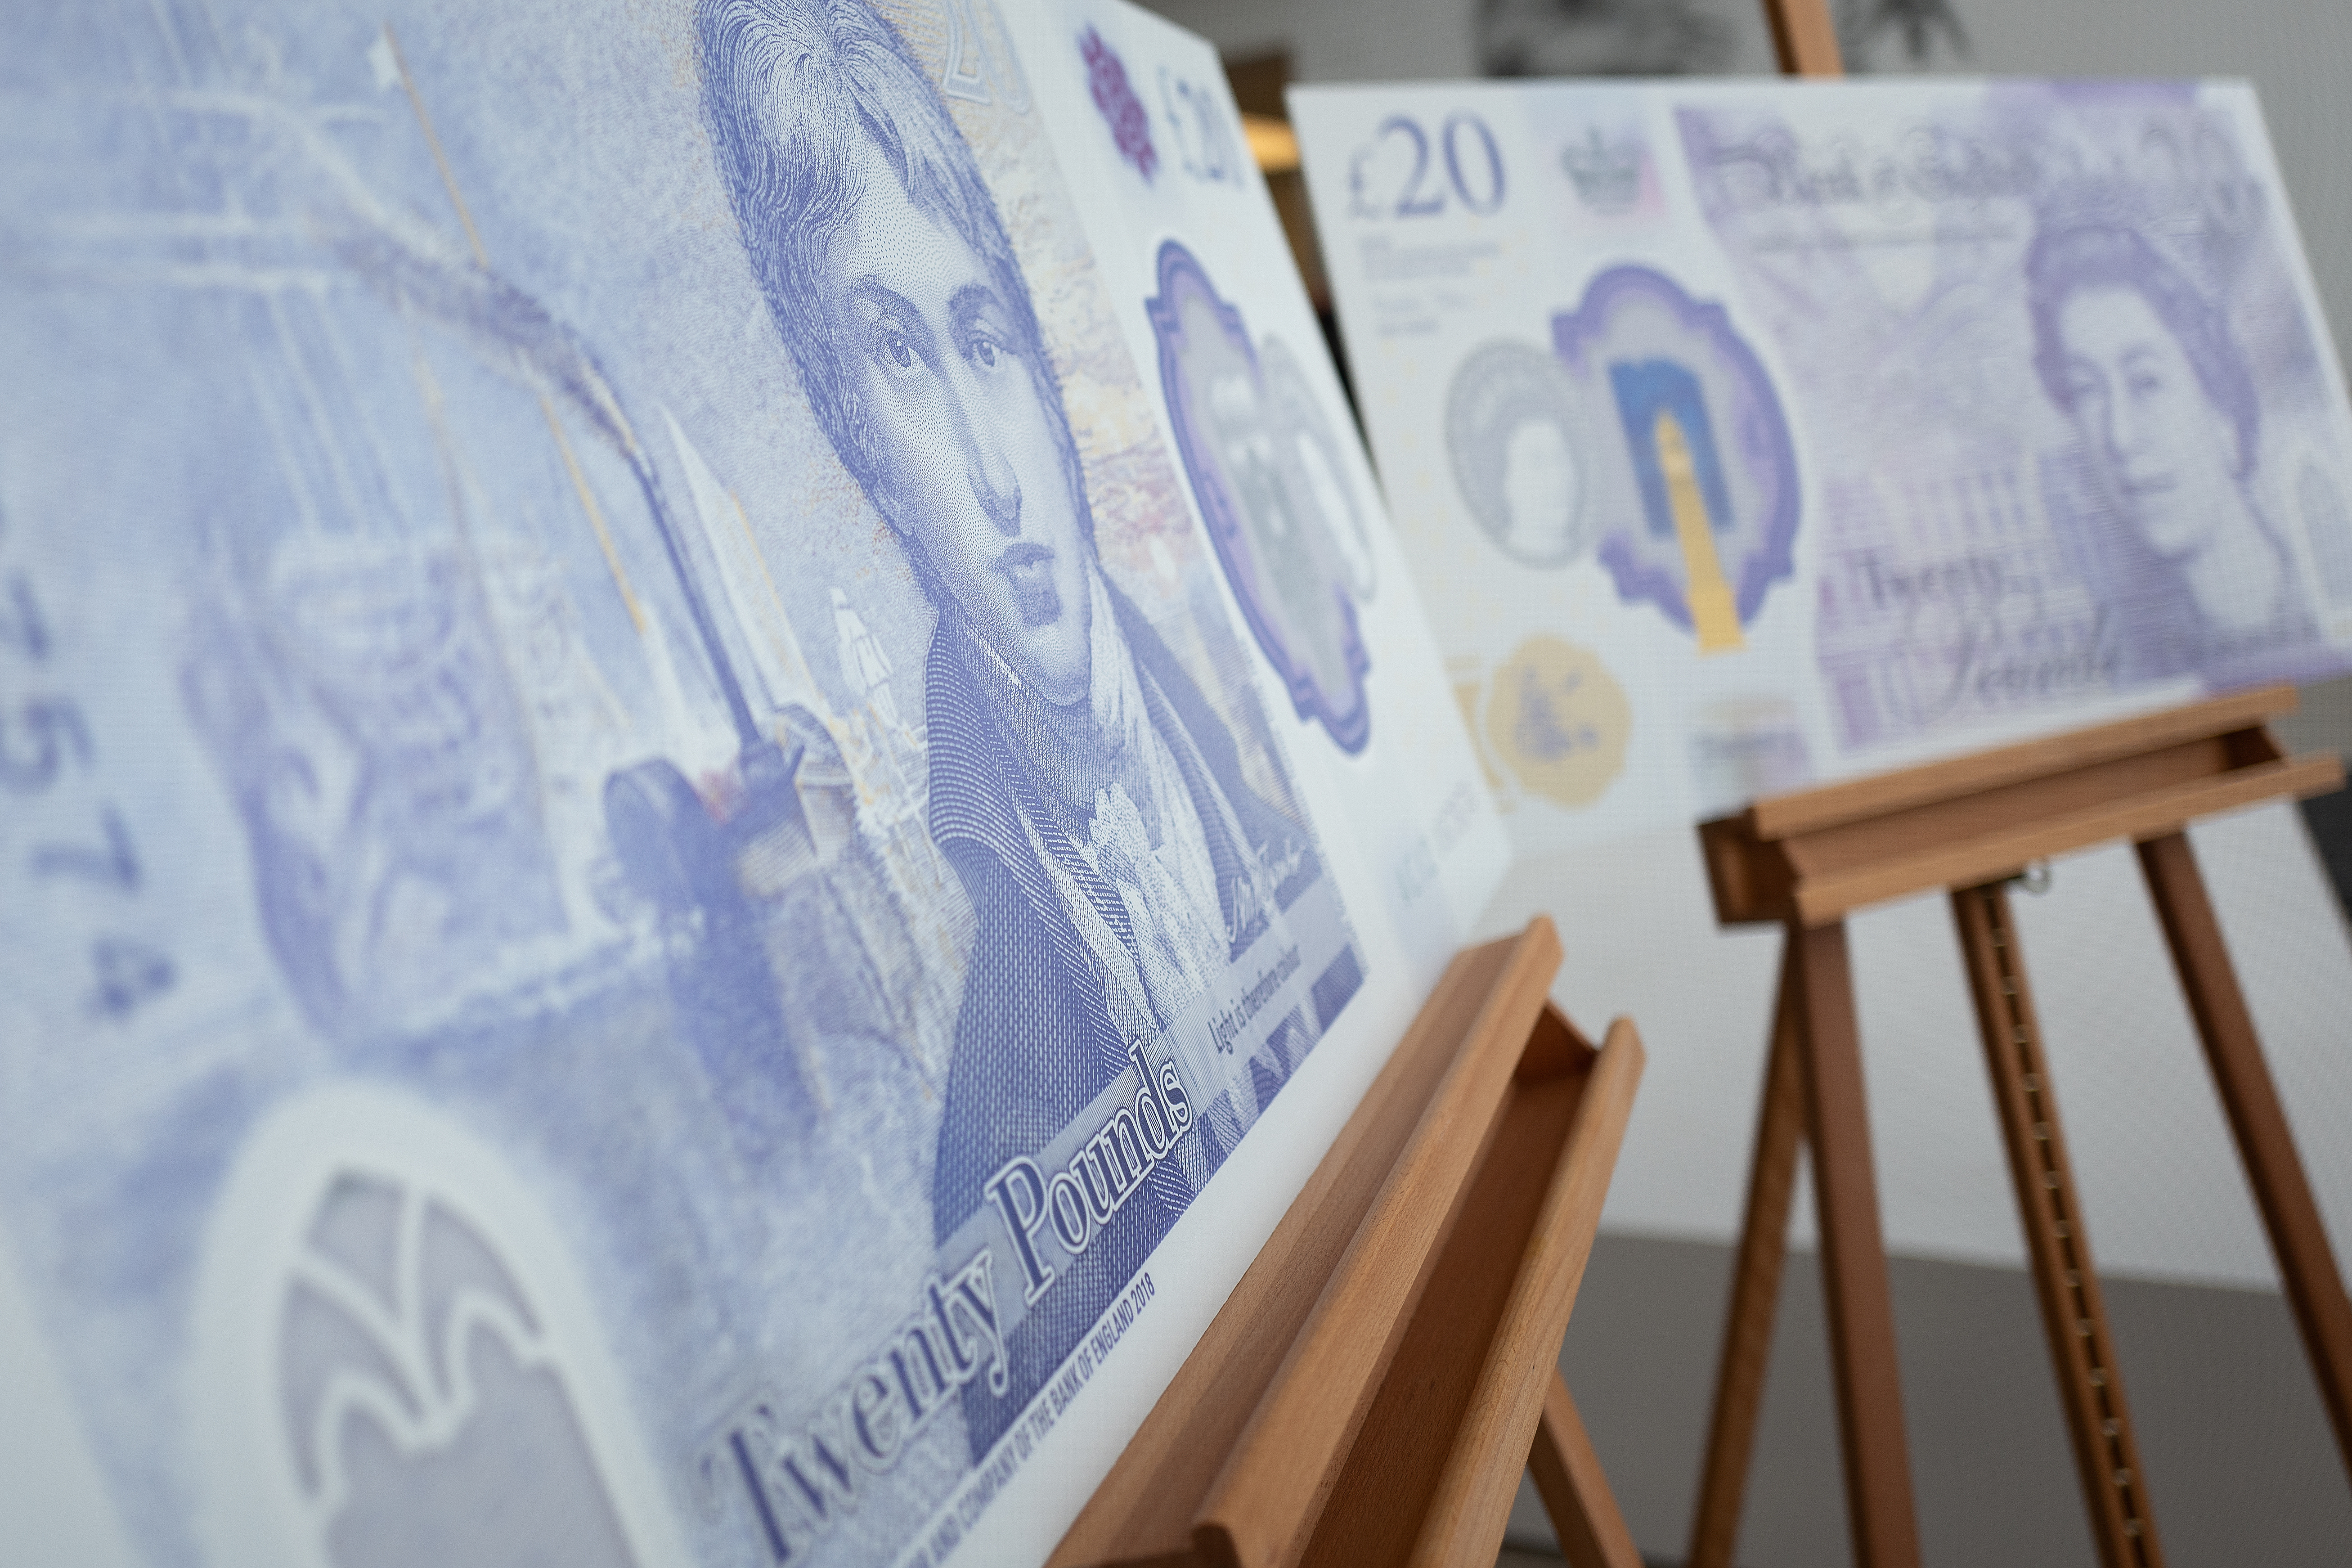 Bank of England reveals design for new £20 note featuring Turner